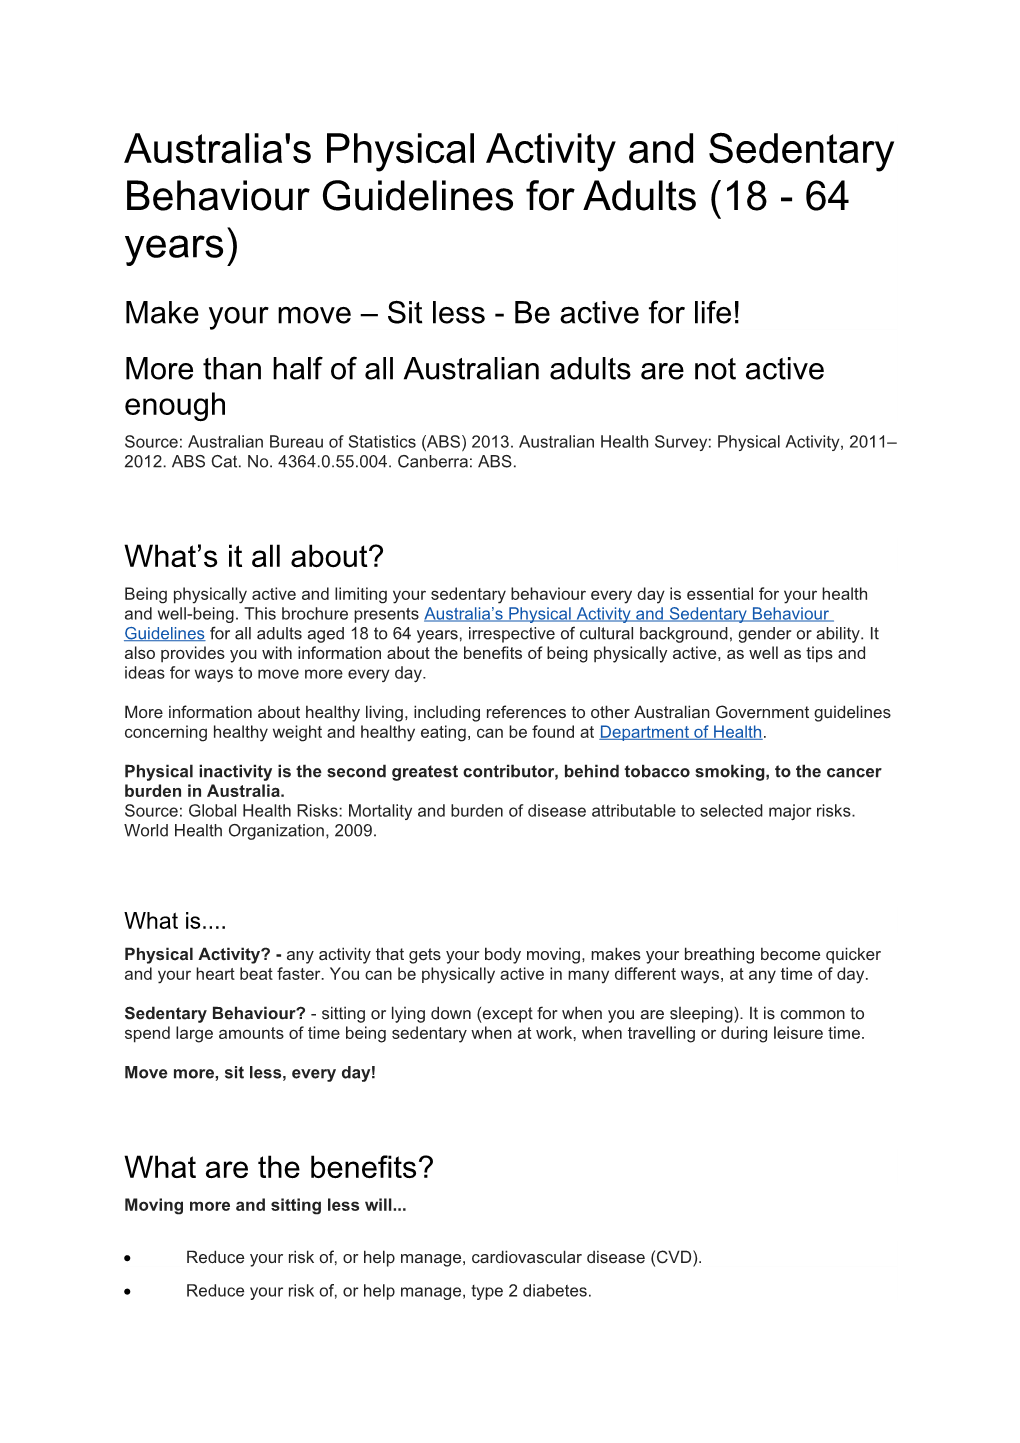 Australia's Physical Activity and Sedentary Behaviour Guidelines for Adults (18 - 64 Years) s1